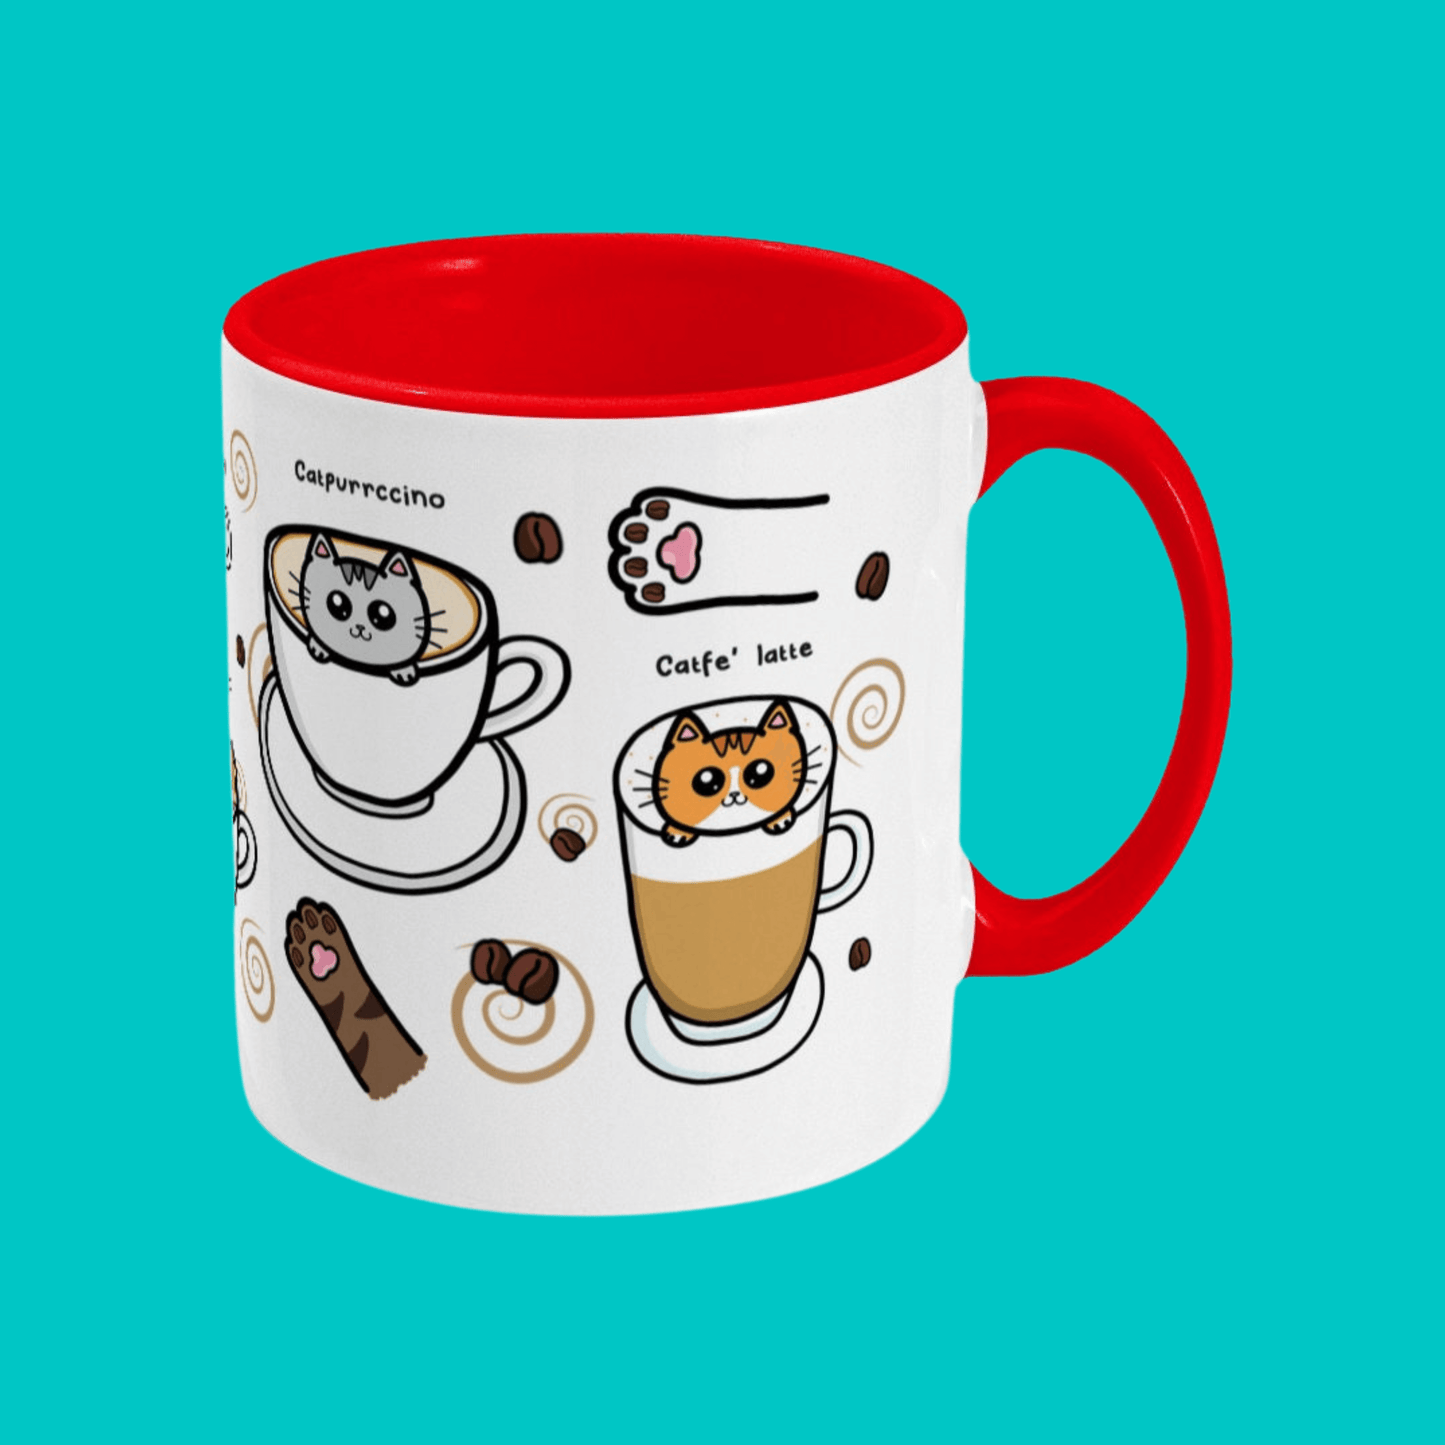 The Coffee Mog Cat Mug on a blue background. The cat themed white coffee mug with red inner and handle is facing left to show illustrations of cat paw toe coffee beans, catpurrccino (a grey cat in a cappuccino), catfe' latte (an orange cat in a latte) with coffee beans and brown swirls.